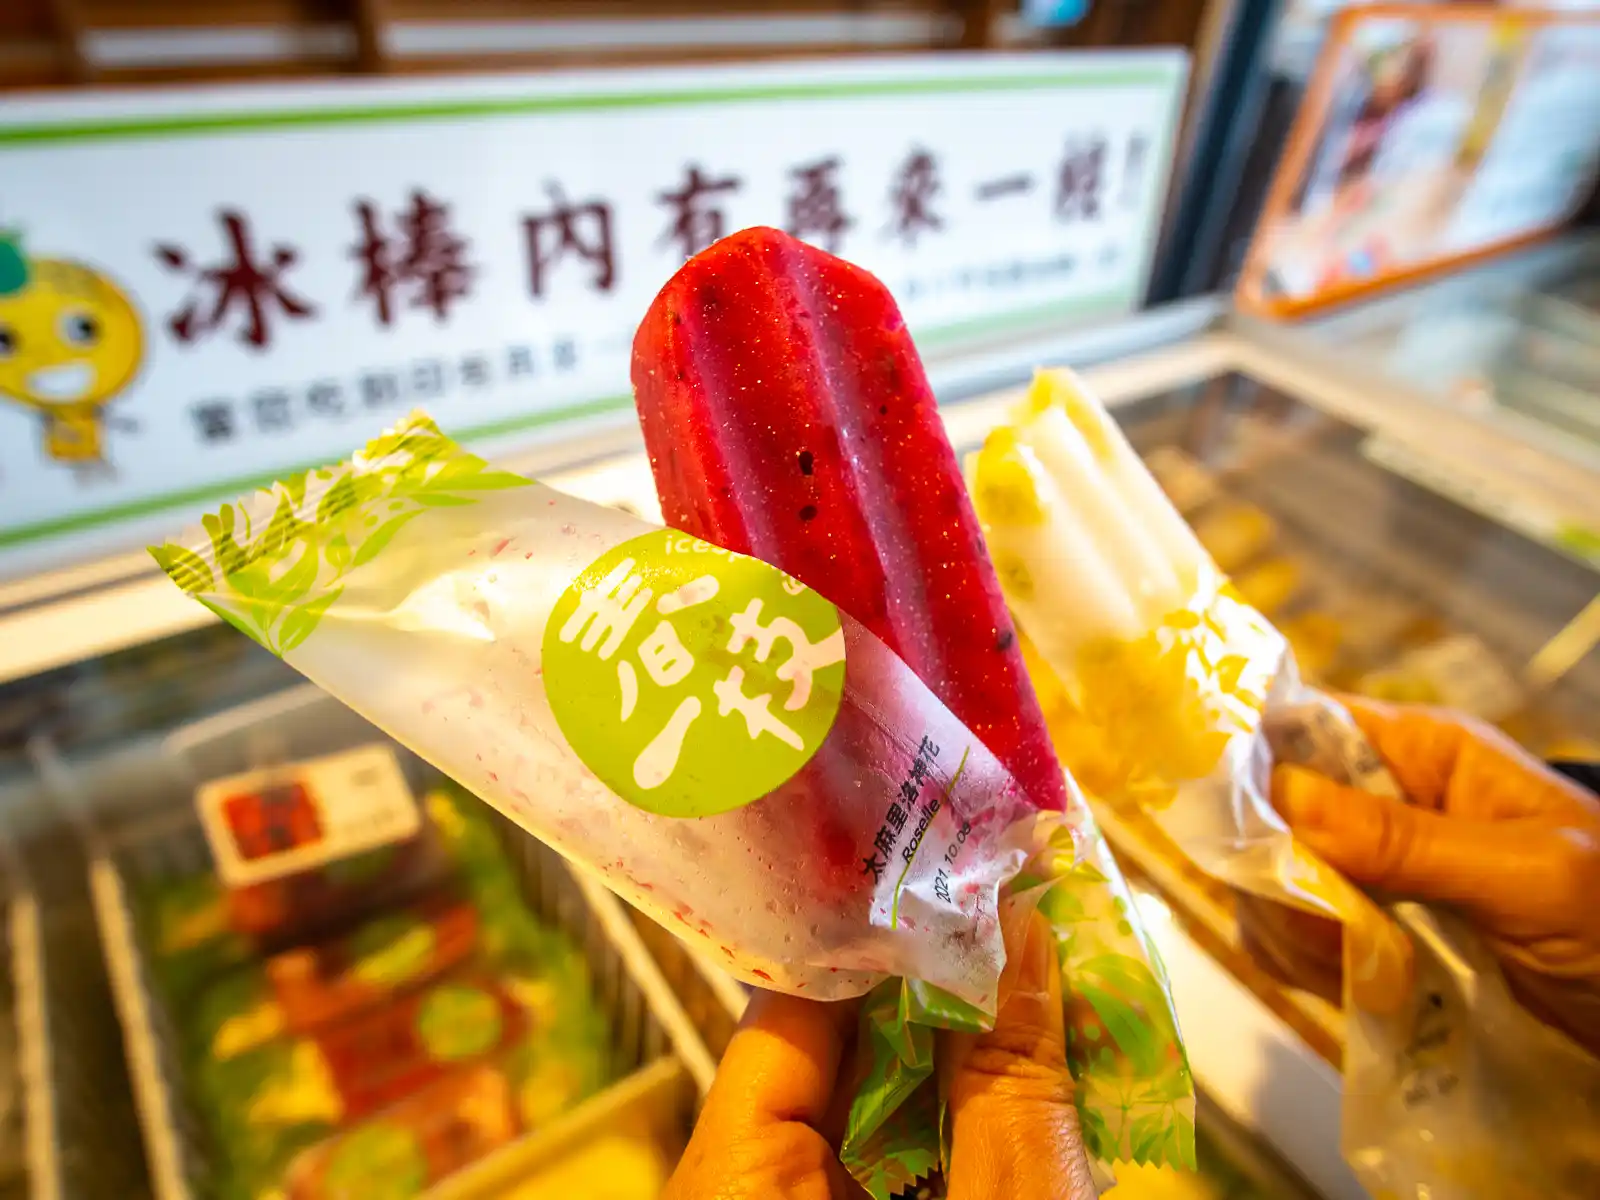 A roselle-flavored ice pop.